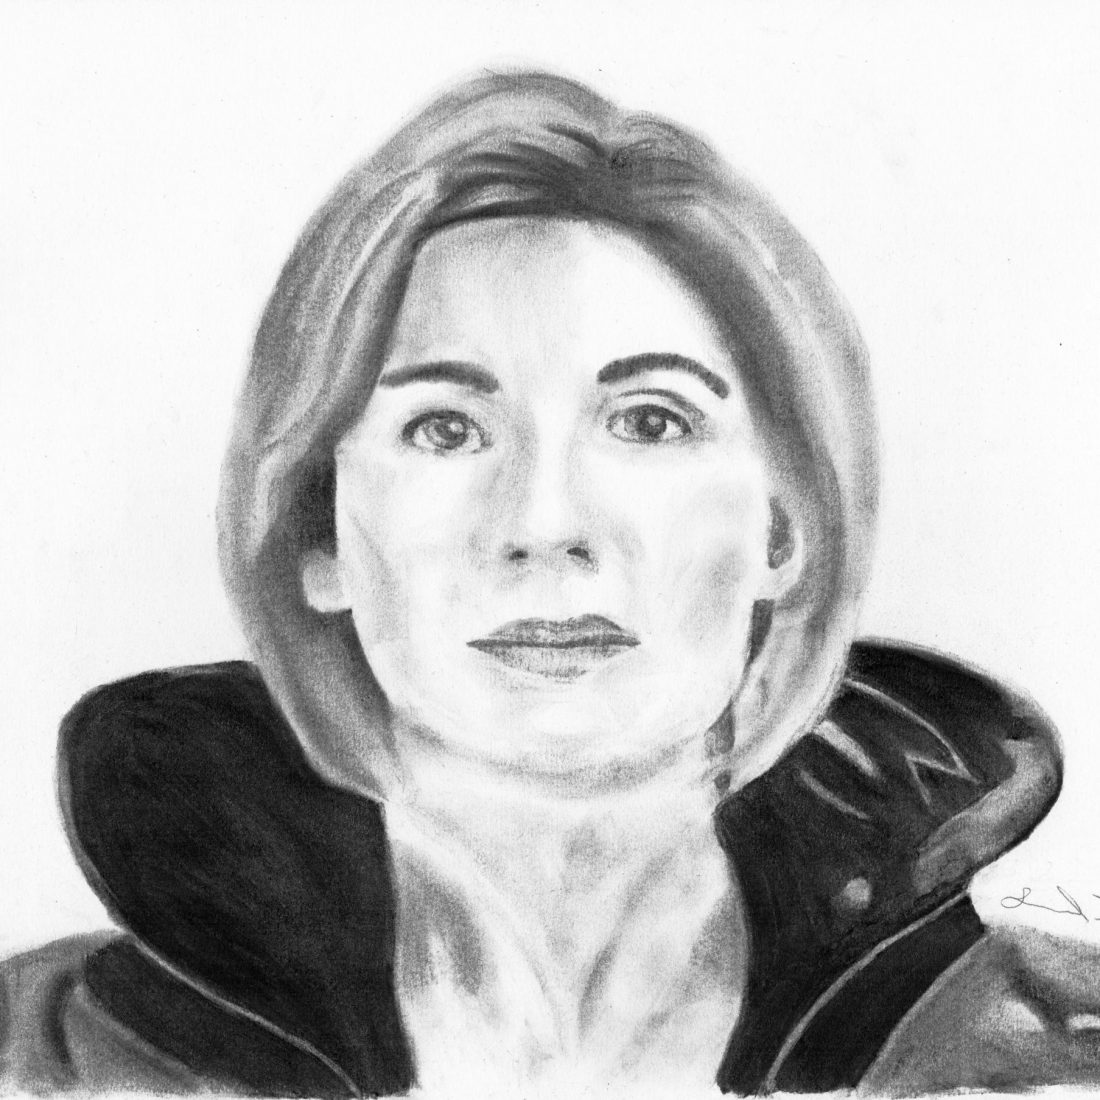 The 13th Doctor / Jodie Whittaker from Doctor Who (2017)